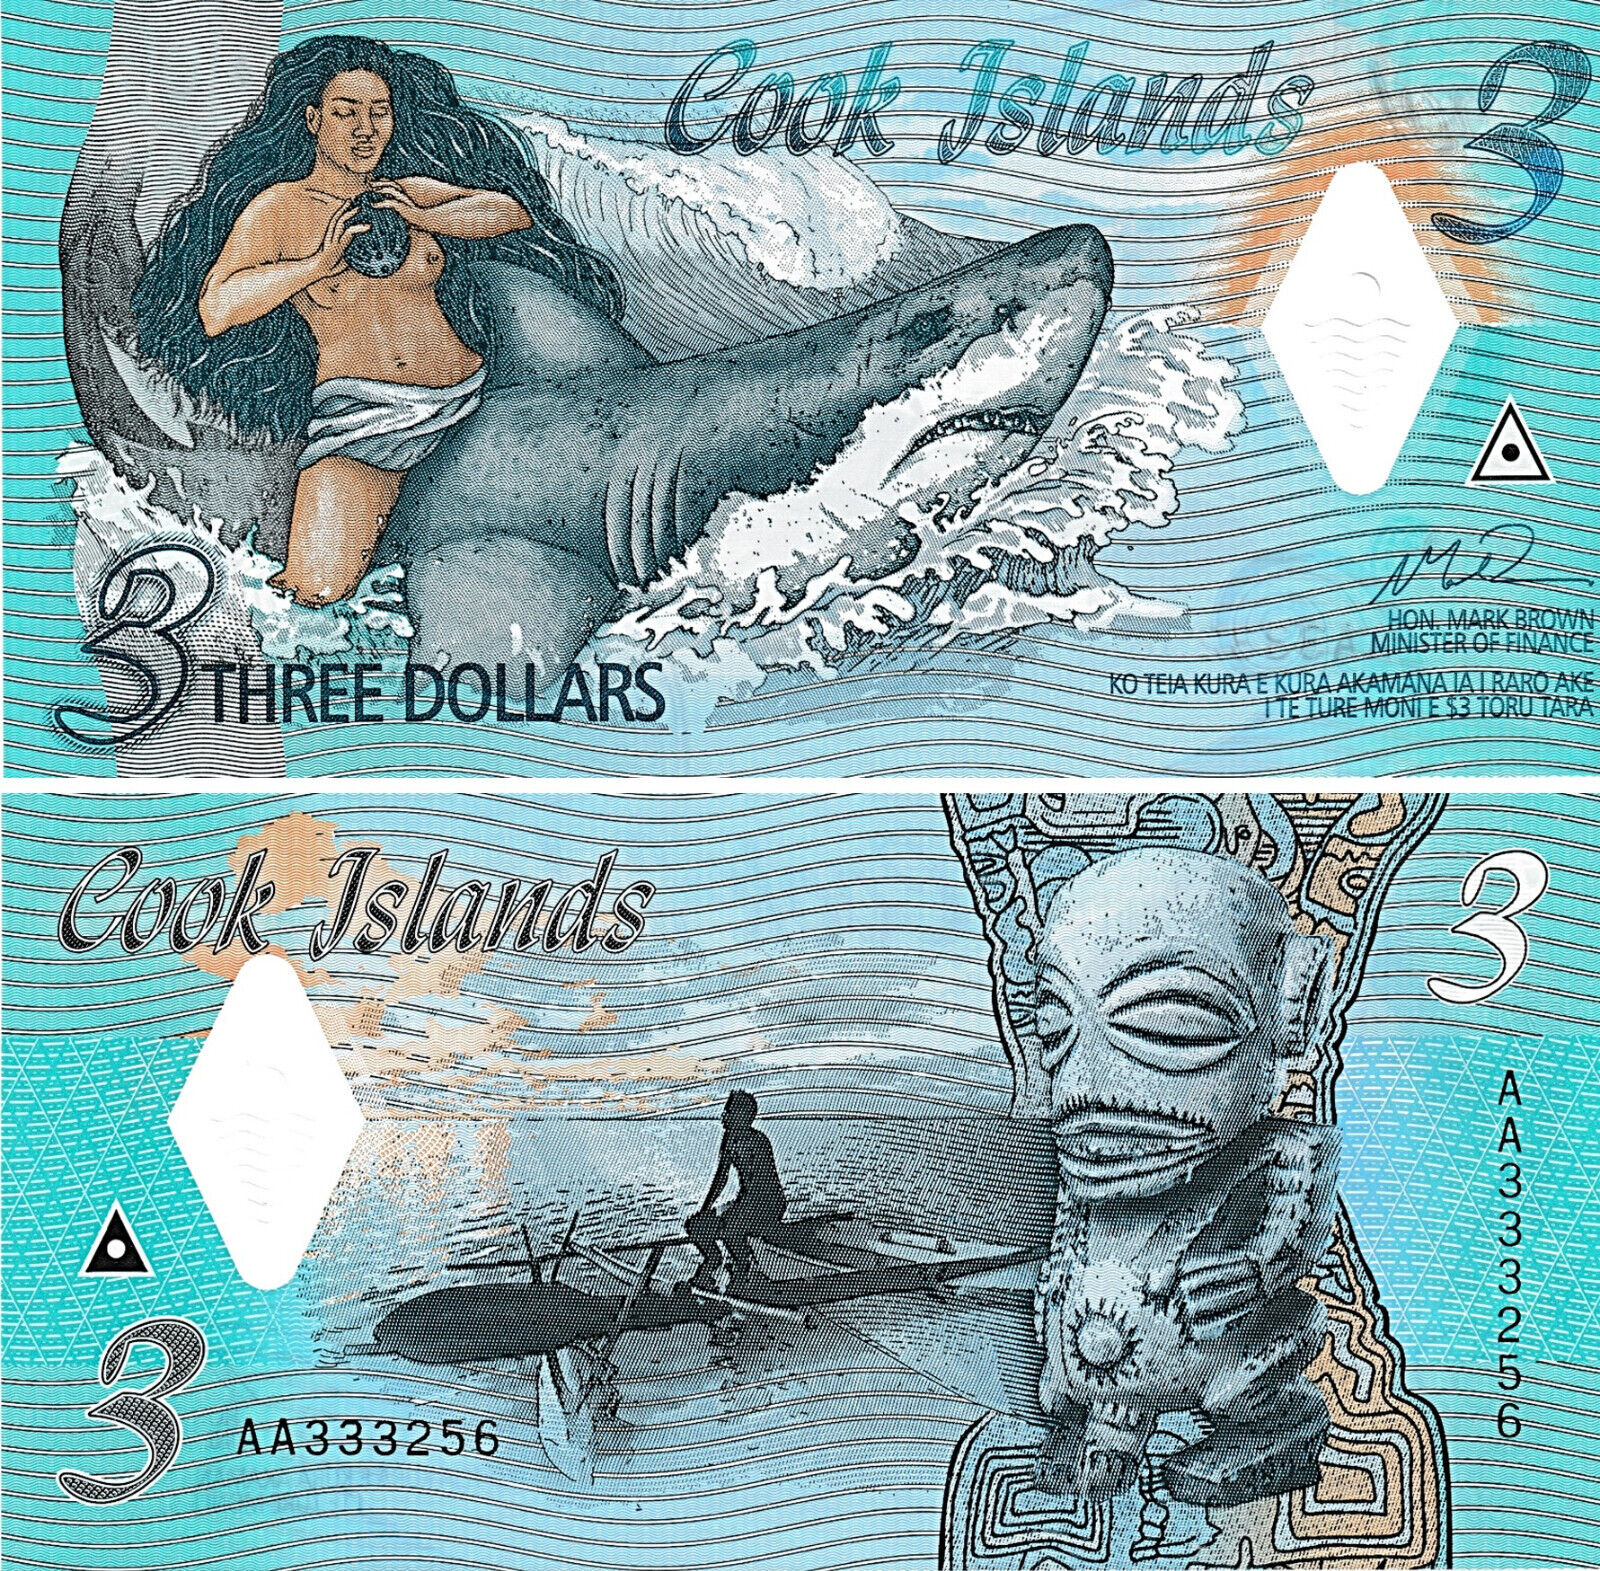 Cook Islands 3 Dollars, 2021, P-11a, Commemorative,  Uncirculated, Polymer